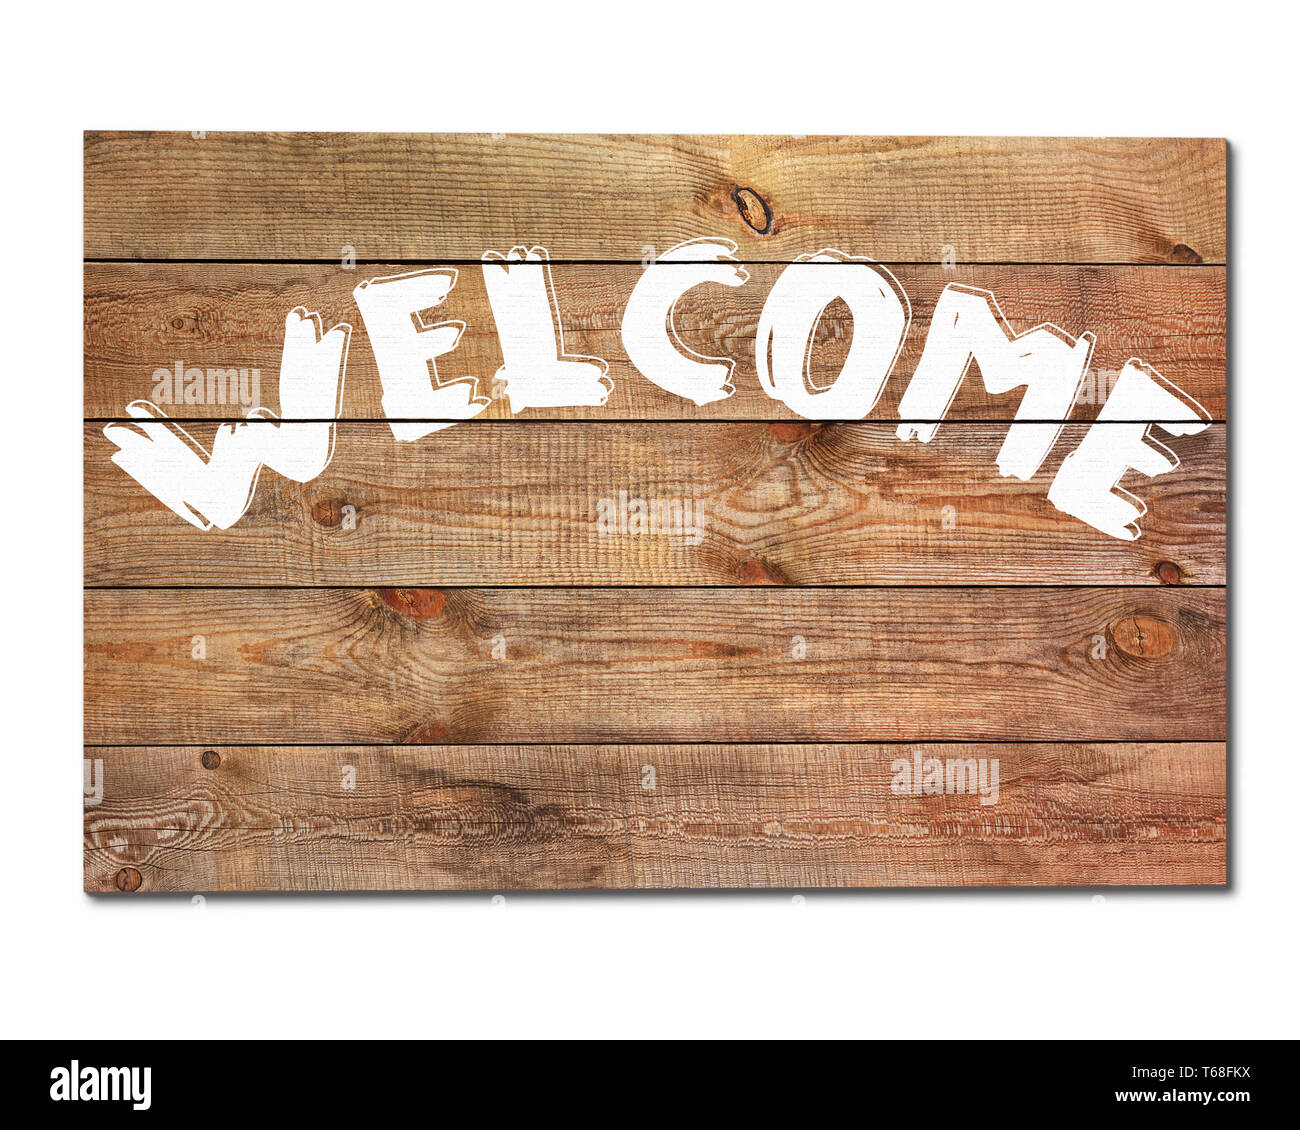 welcome home' Cut Out Stock Images & Pictures - Alamy